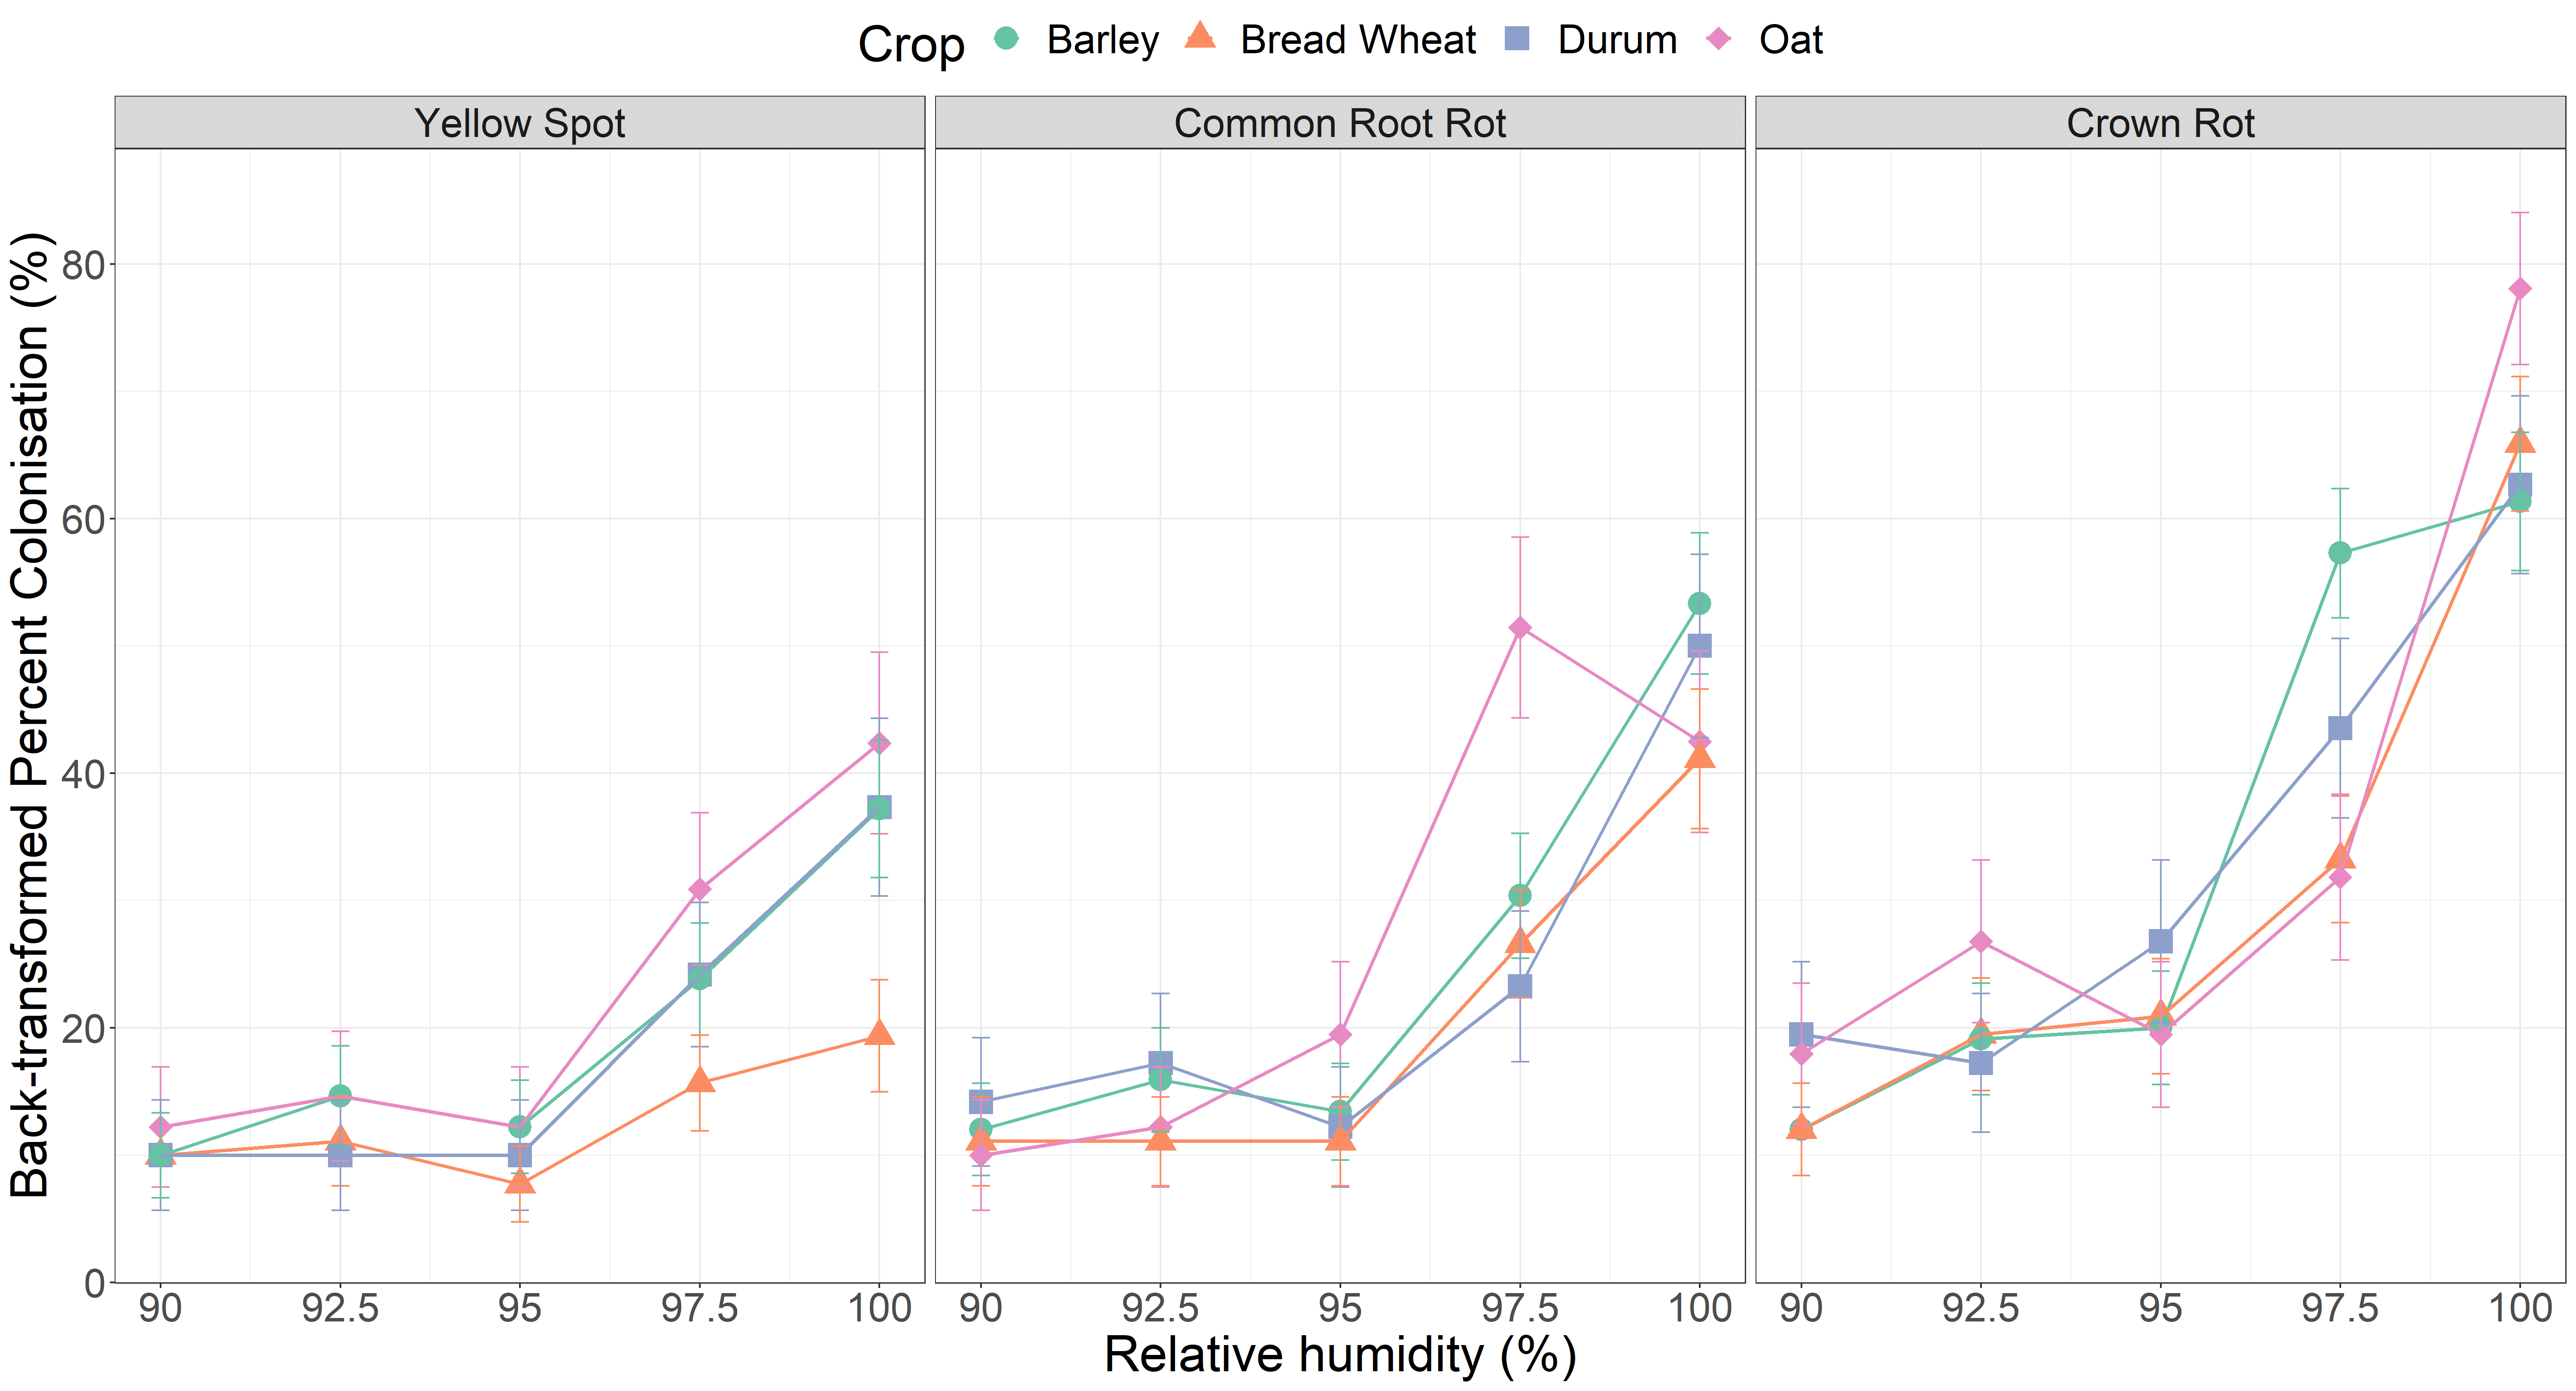 These three line graphs show the inoculum production as a percentage (%) of different types of cereal stubble colonised by three pathogens subject to moisture conditions of 90% RH, 92.5% RH, 95% RH, 97.5% RH or 100% RH for seven days. Error bars represent approximate standard error of the mean.